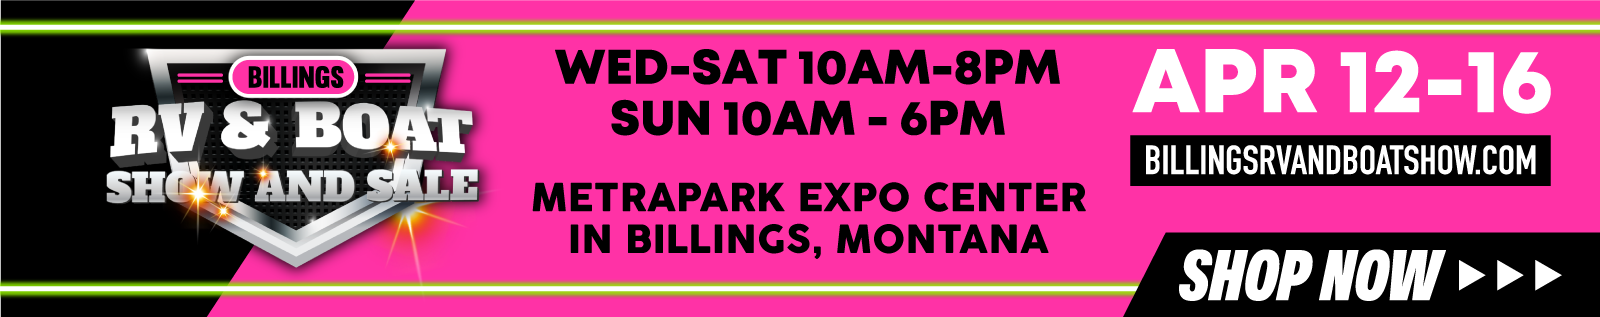 Billings RV & Boat Show and Sale at MetraPark